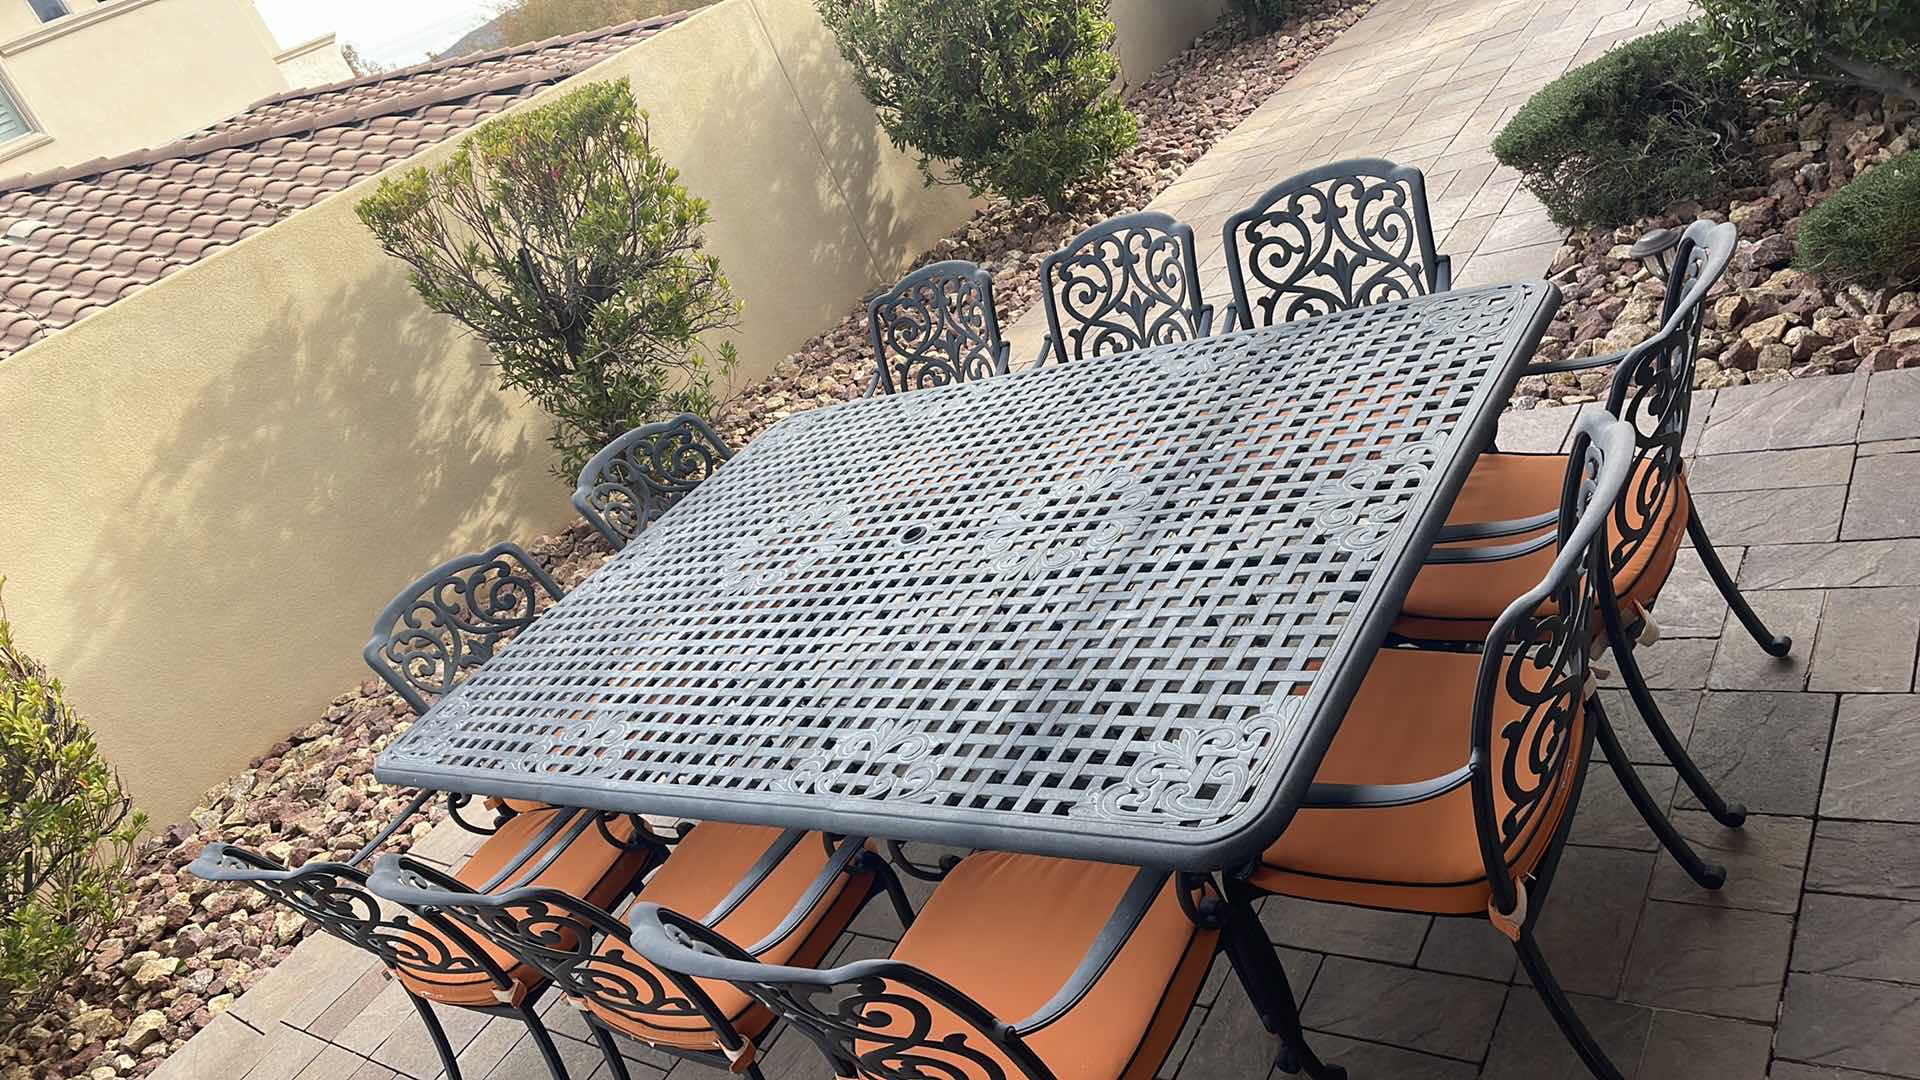 Photo 2 of LUXURY PATIO FURNITURE SET - TABLE 64” X 90” WITH 10 CHAIRS ORANGE CUSHIONS WITH BLACK WELTING